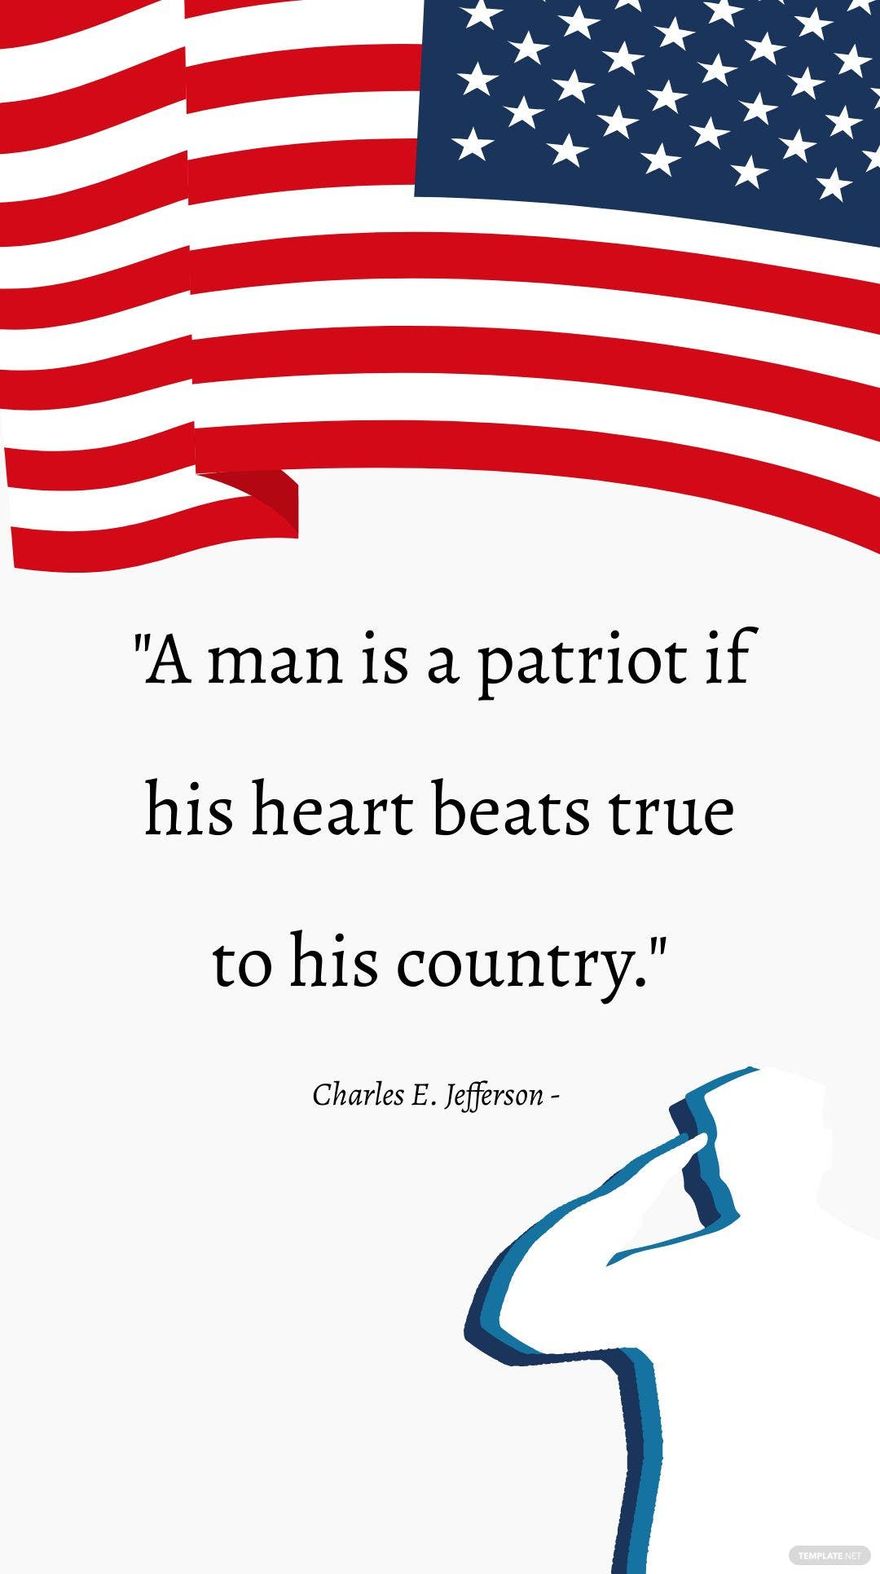 Charles E. Jefferson - A man is a patriot if his heart beats true to his country.